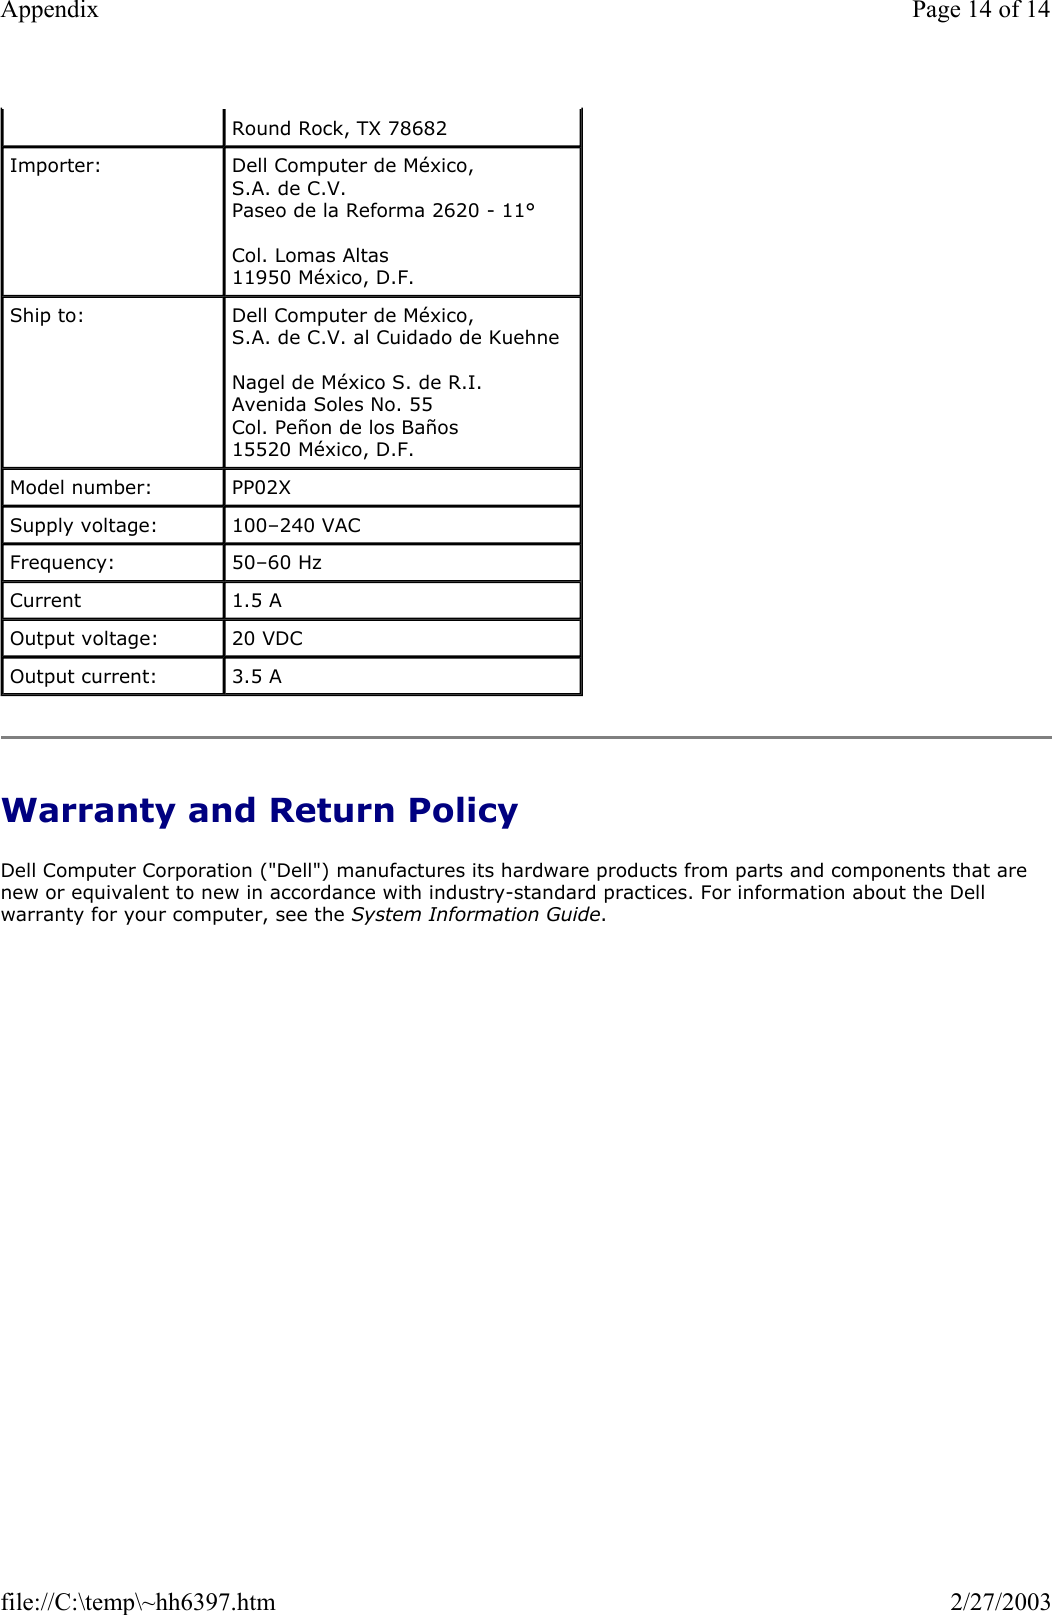 Warranty and Return Policy Dell Computer Corporation (&quot;Dell&quot;) manufactures its hardware products from parts and components that are new or equivalent to new in accordance with industry-standard practices. For information about the Dell warranty for your computer, see the System Information Guide. Round Rock, TX 78682 Importer:  Dell Computer de México,  S.A. de C.V.  Paseo de la Reforma 2620 - 11°  Col. Lomas Altas  11950 México, D.F.  Ship to:  Dell Computer de México,  S.A. de C.V. al Cuidado de Kuehne  Nagel de México S. de R.I. Avenida Soles No. 55 Col. Peñon de los Baños 15520 México, D.F. Model number:  PP02X Supply voltage:  100–240 VAC Frequency:  50–60 Hz Current  1.5 A Output voltage:  20 VDC Output current:  3.5 A Page 14 of 14Appendix2/27/2003file://C:\temp\~hh6397.htm